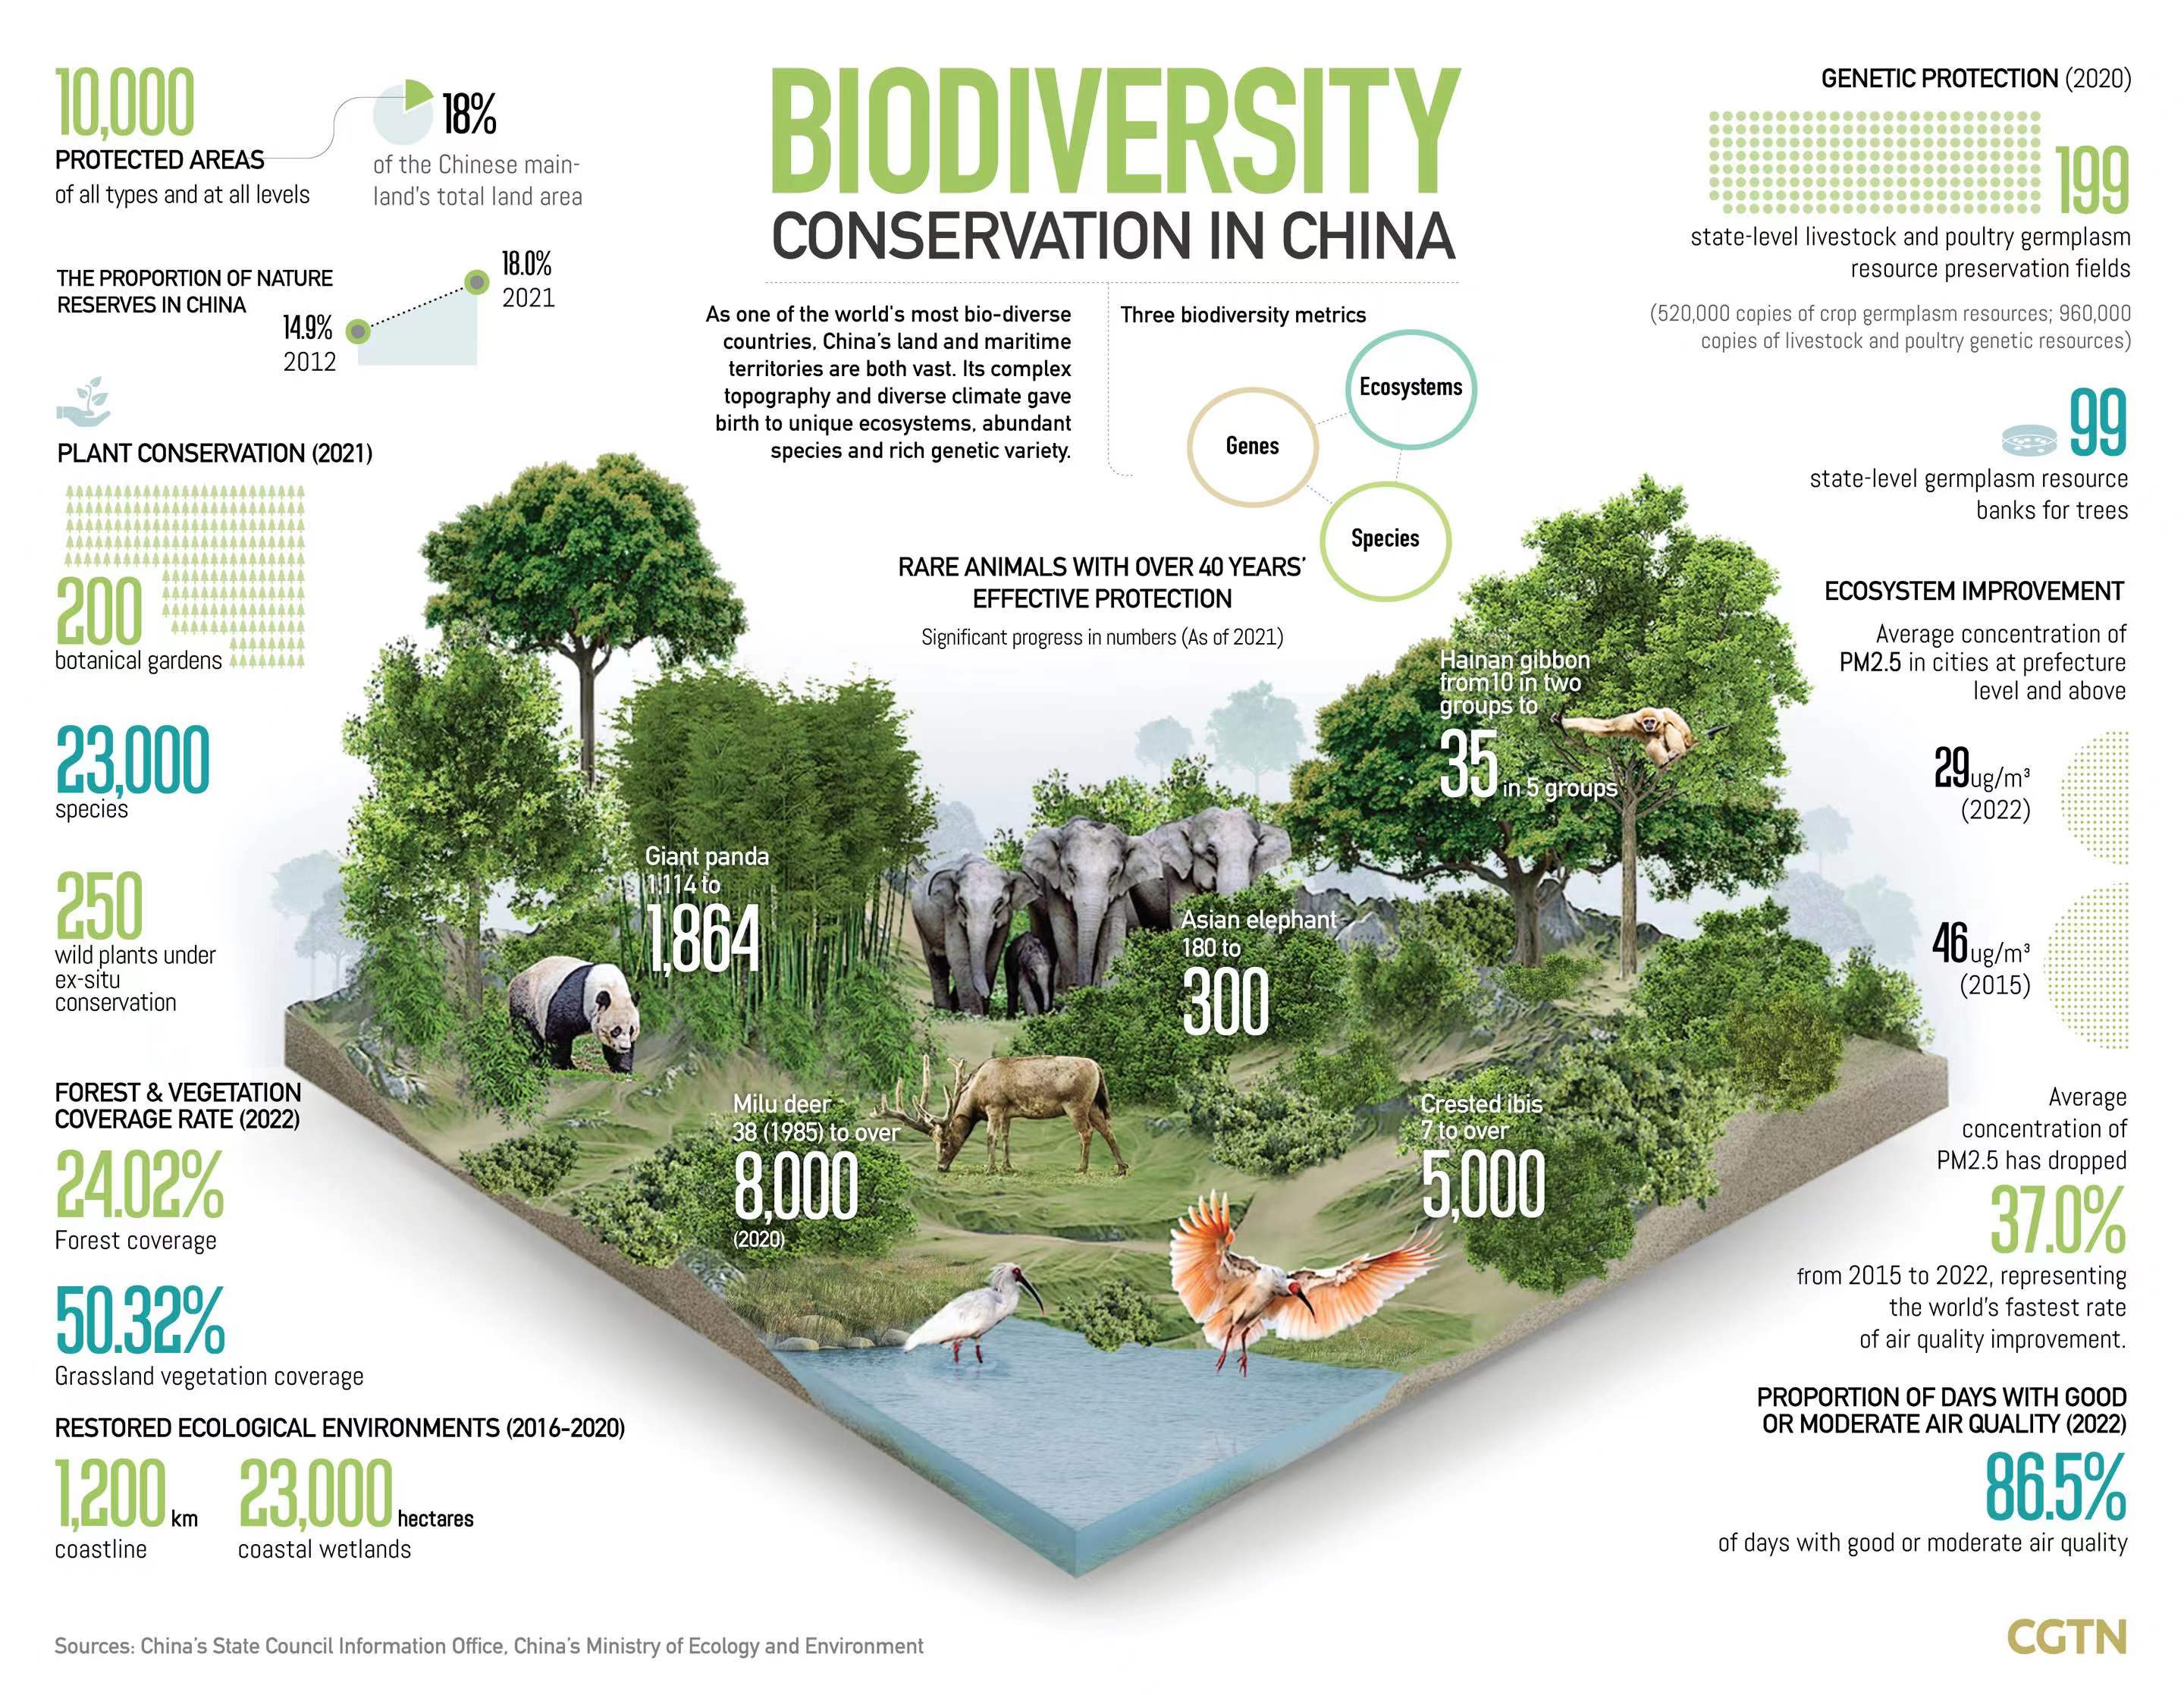 Graphics: Biodiversity conservation in China